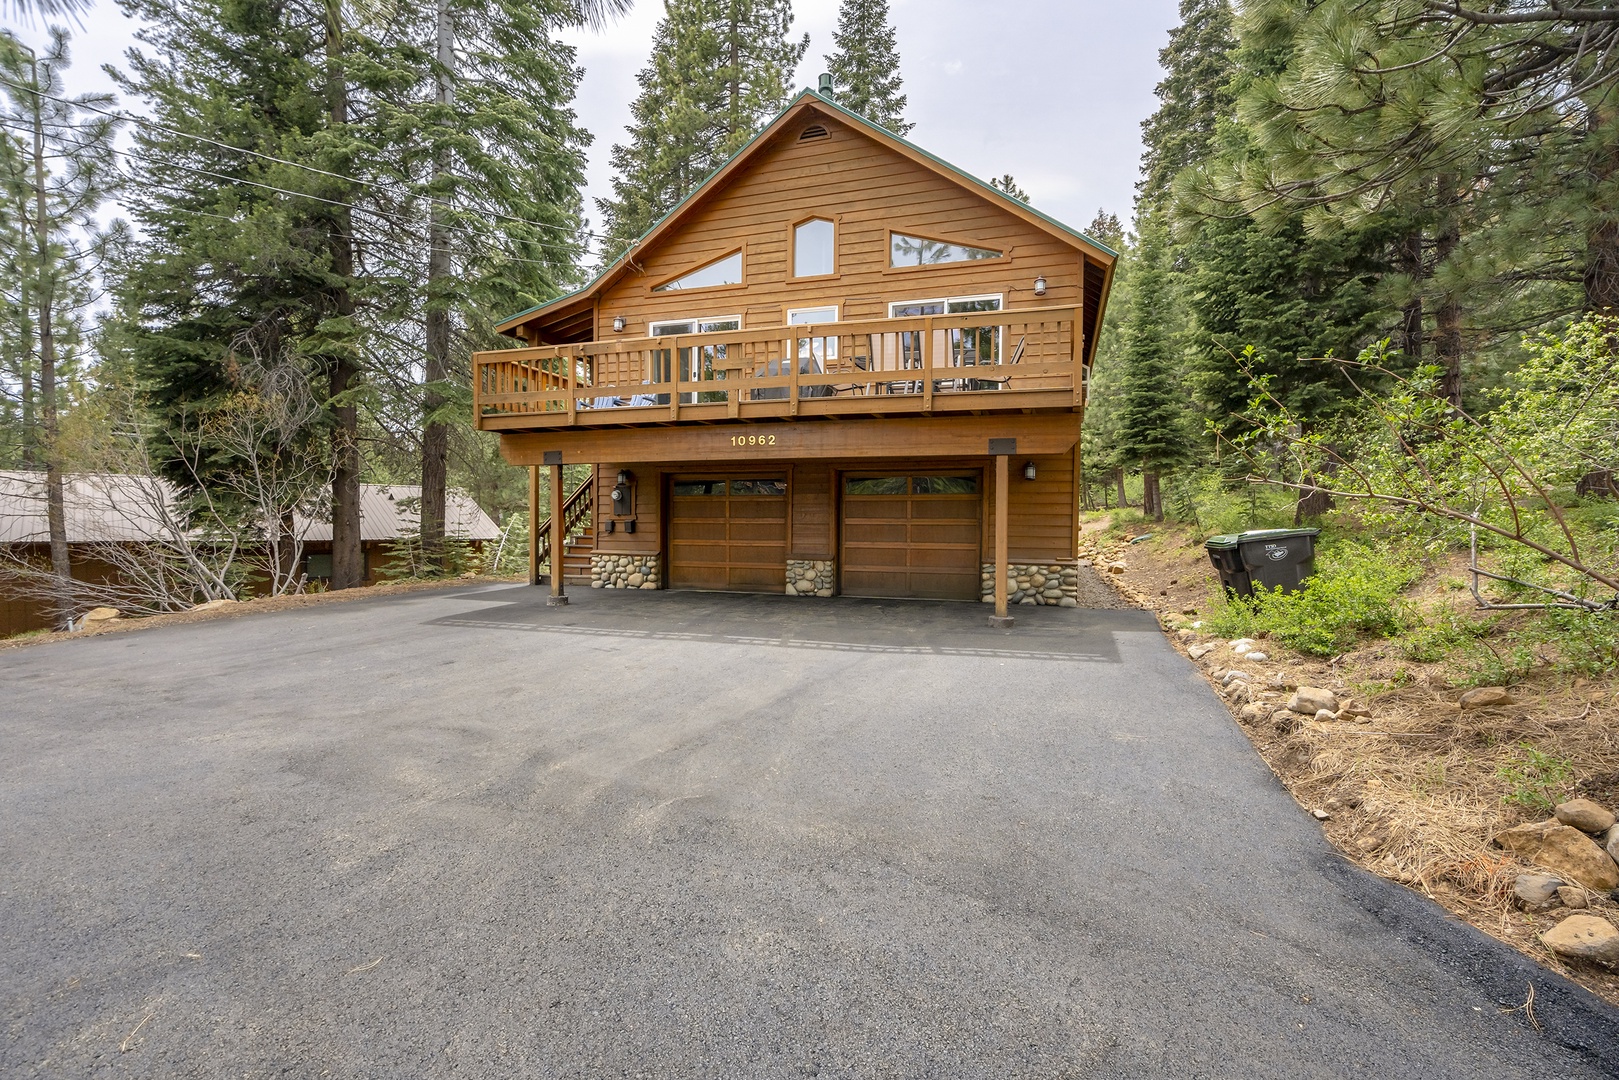 Outside View: Exquisite Alpine Chalet